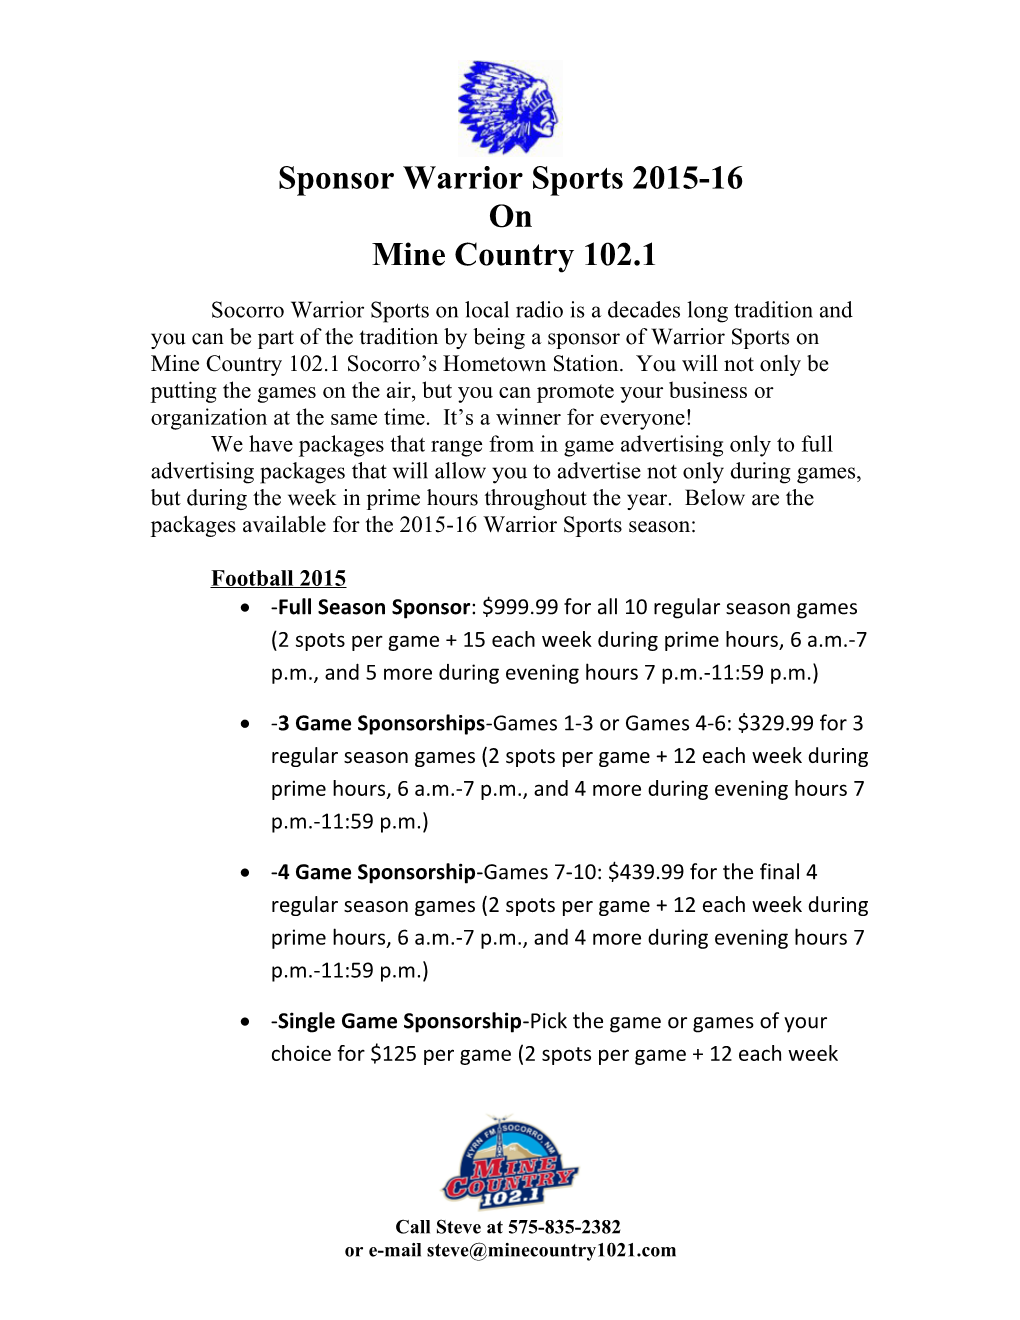 Socorro Warrior Sports on Local Radio Is a Decades Long Tradition and You Can Be Part Of